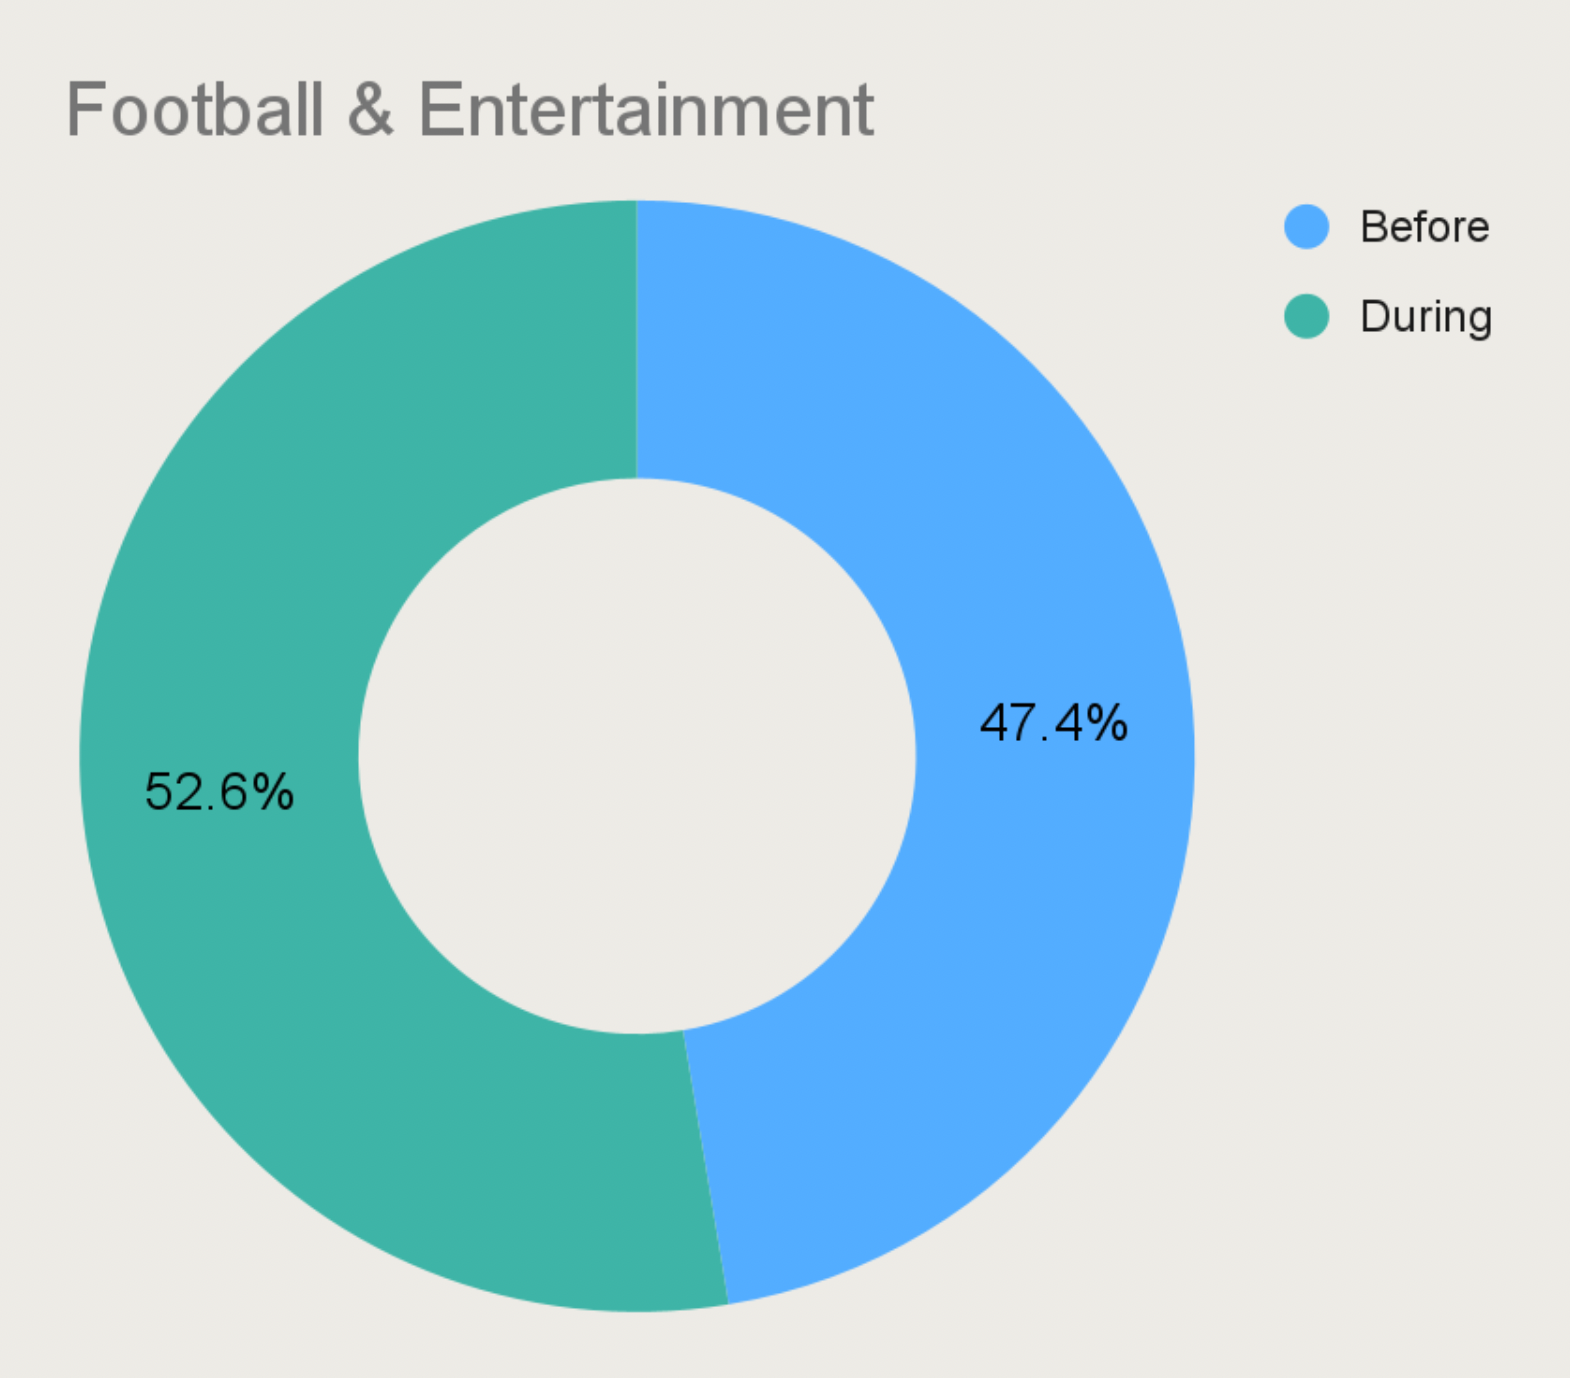 Figure 2: Football & Entertainment Audience Participation in World Cup Controversial Discussion Before and During the Tournament